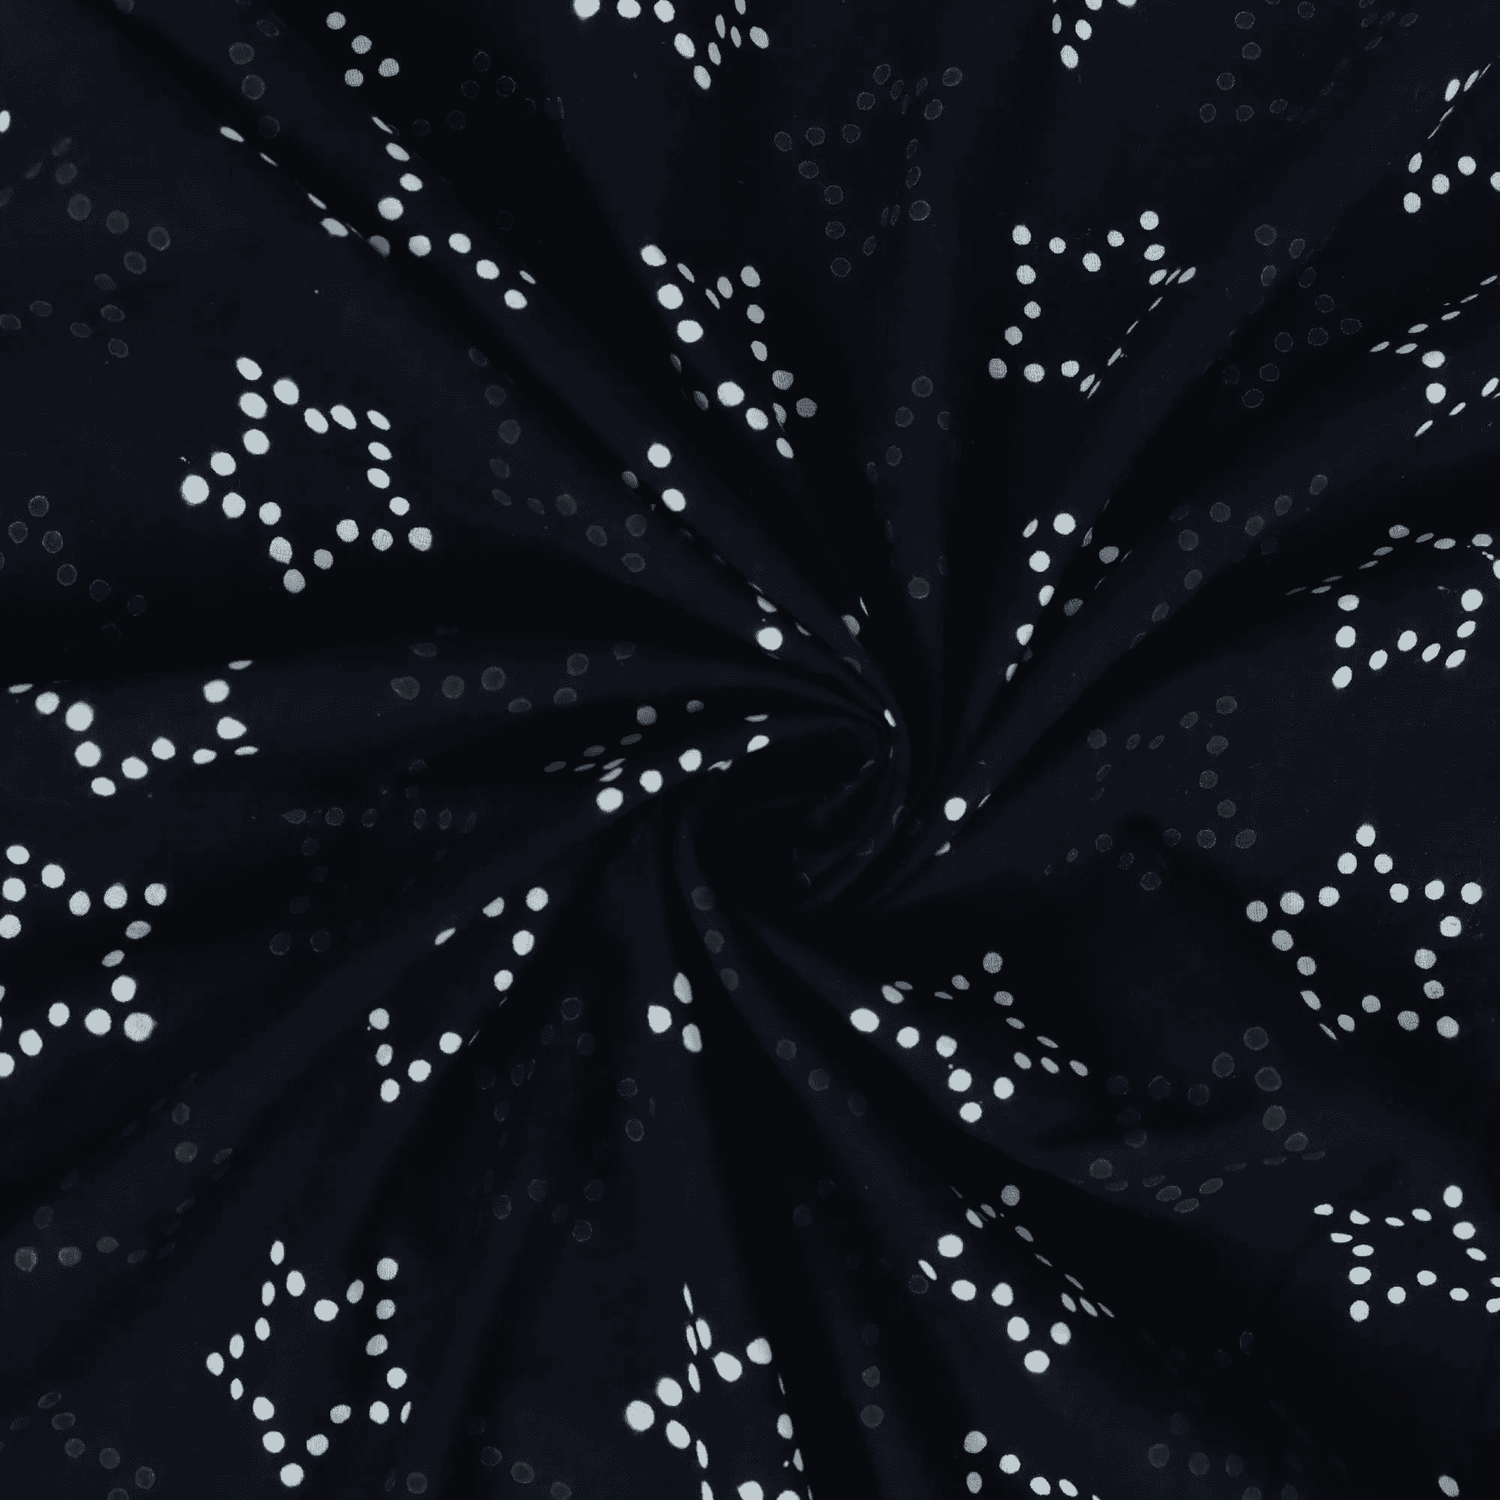 Black Cotton Fabric with White Star Printed Cotton Cloth